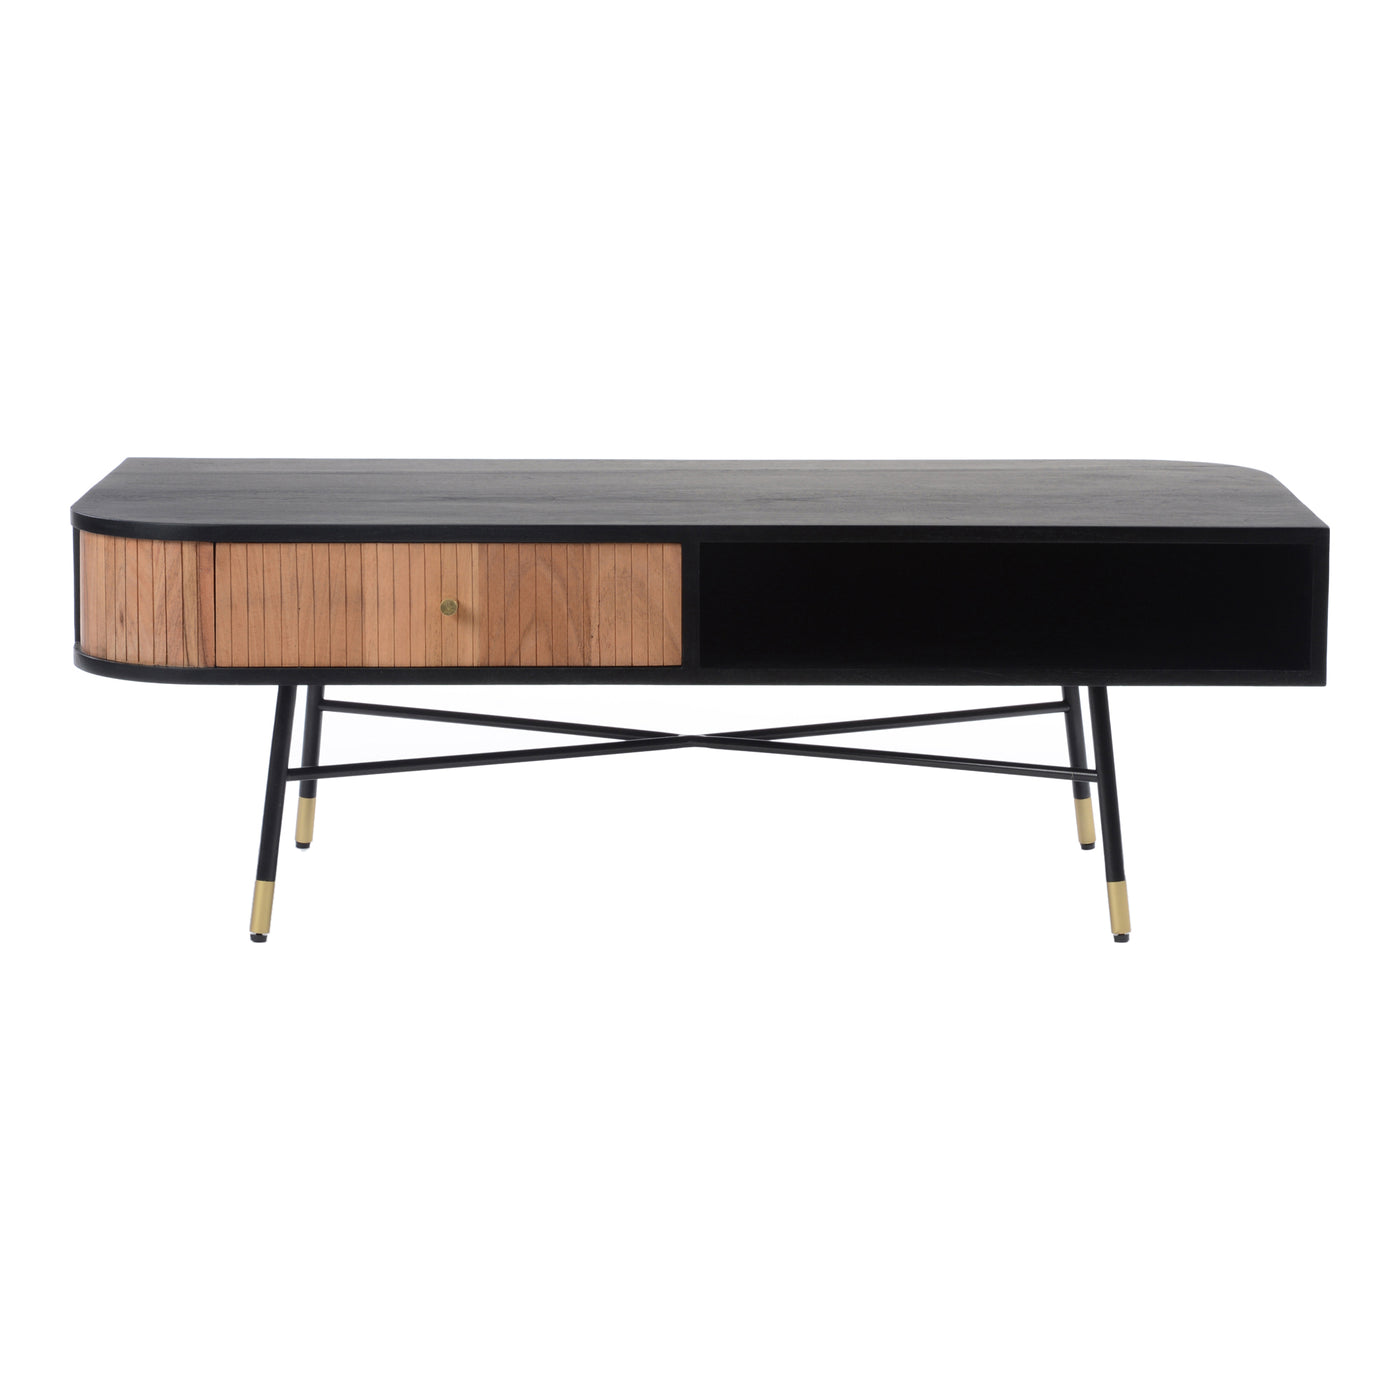 A wood and iron affair. The Bezier coffee table adds character to your home with its curved sides, opposite drawers, and p...